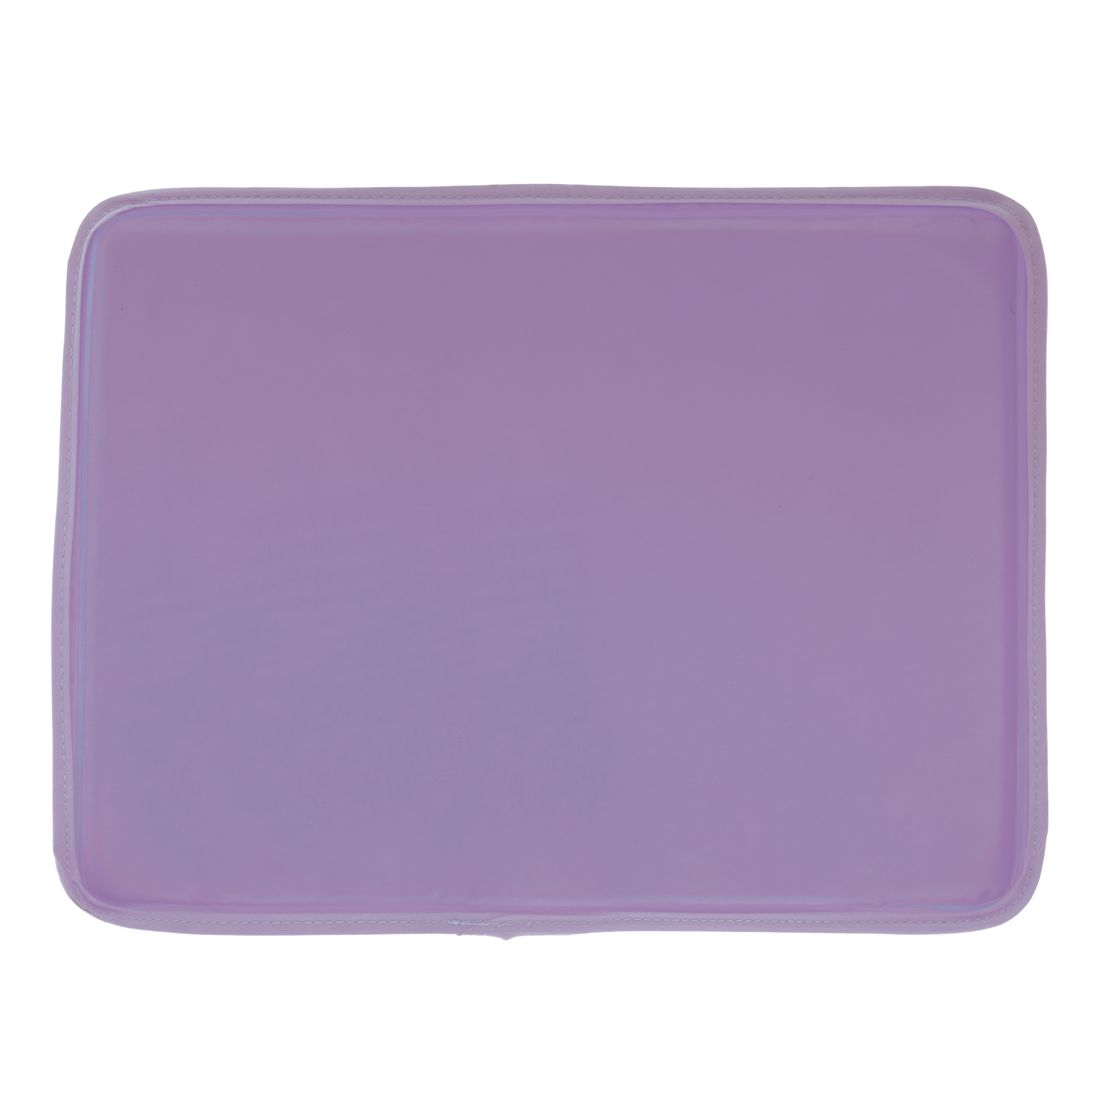 Aroma Home Lavender Gel Cooling Pillow 40 x 50 cm